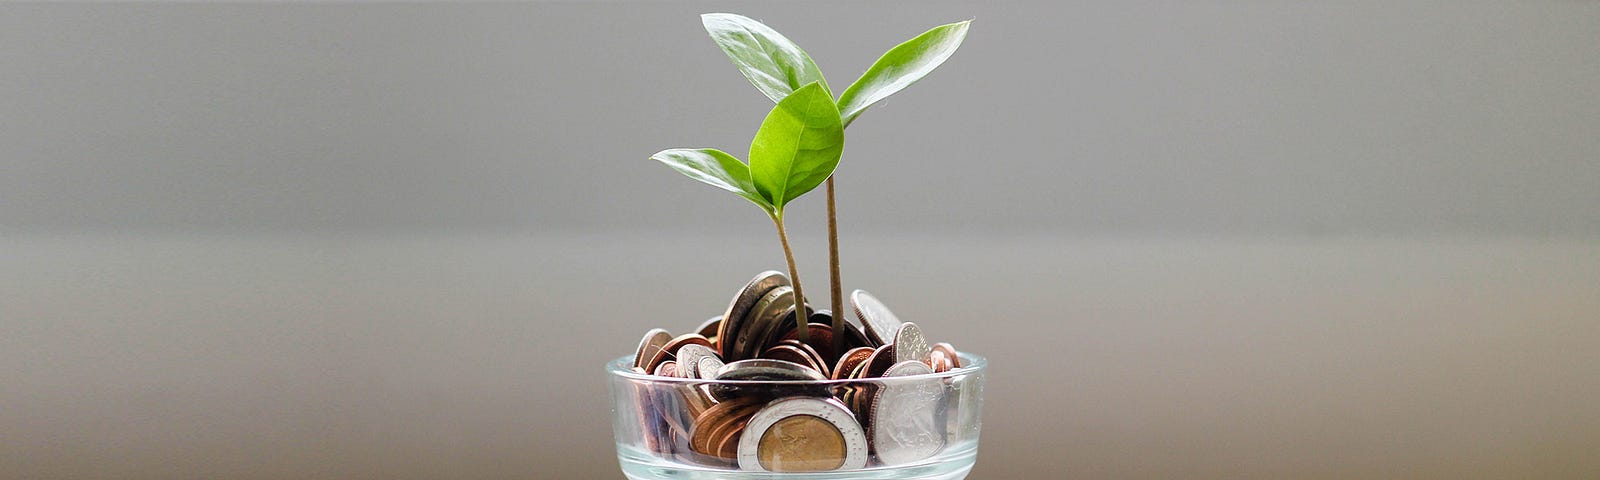 Cup of coins with green plant growing out of it